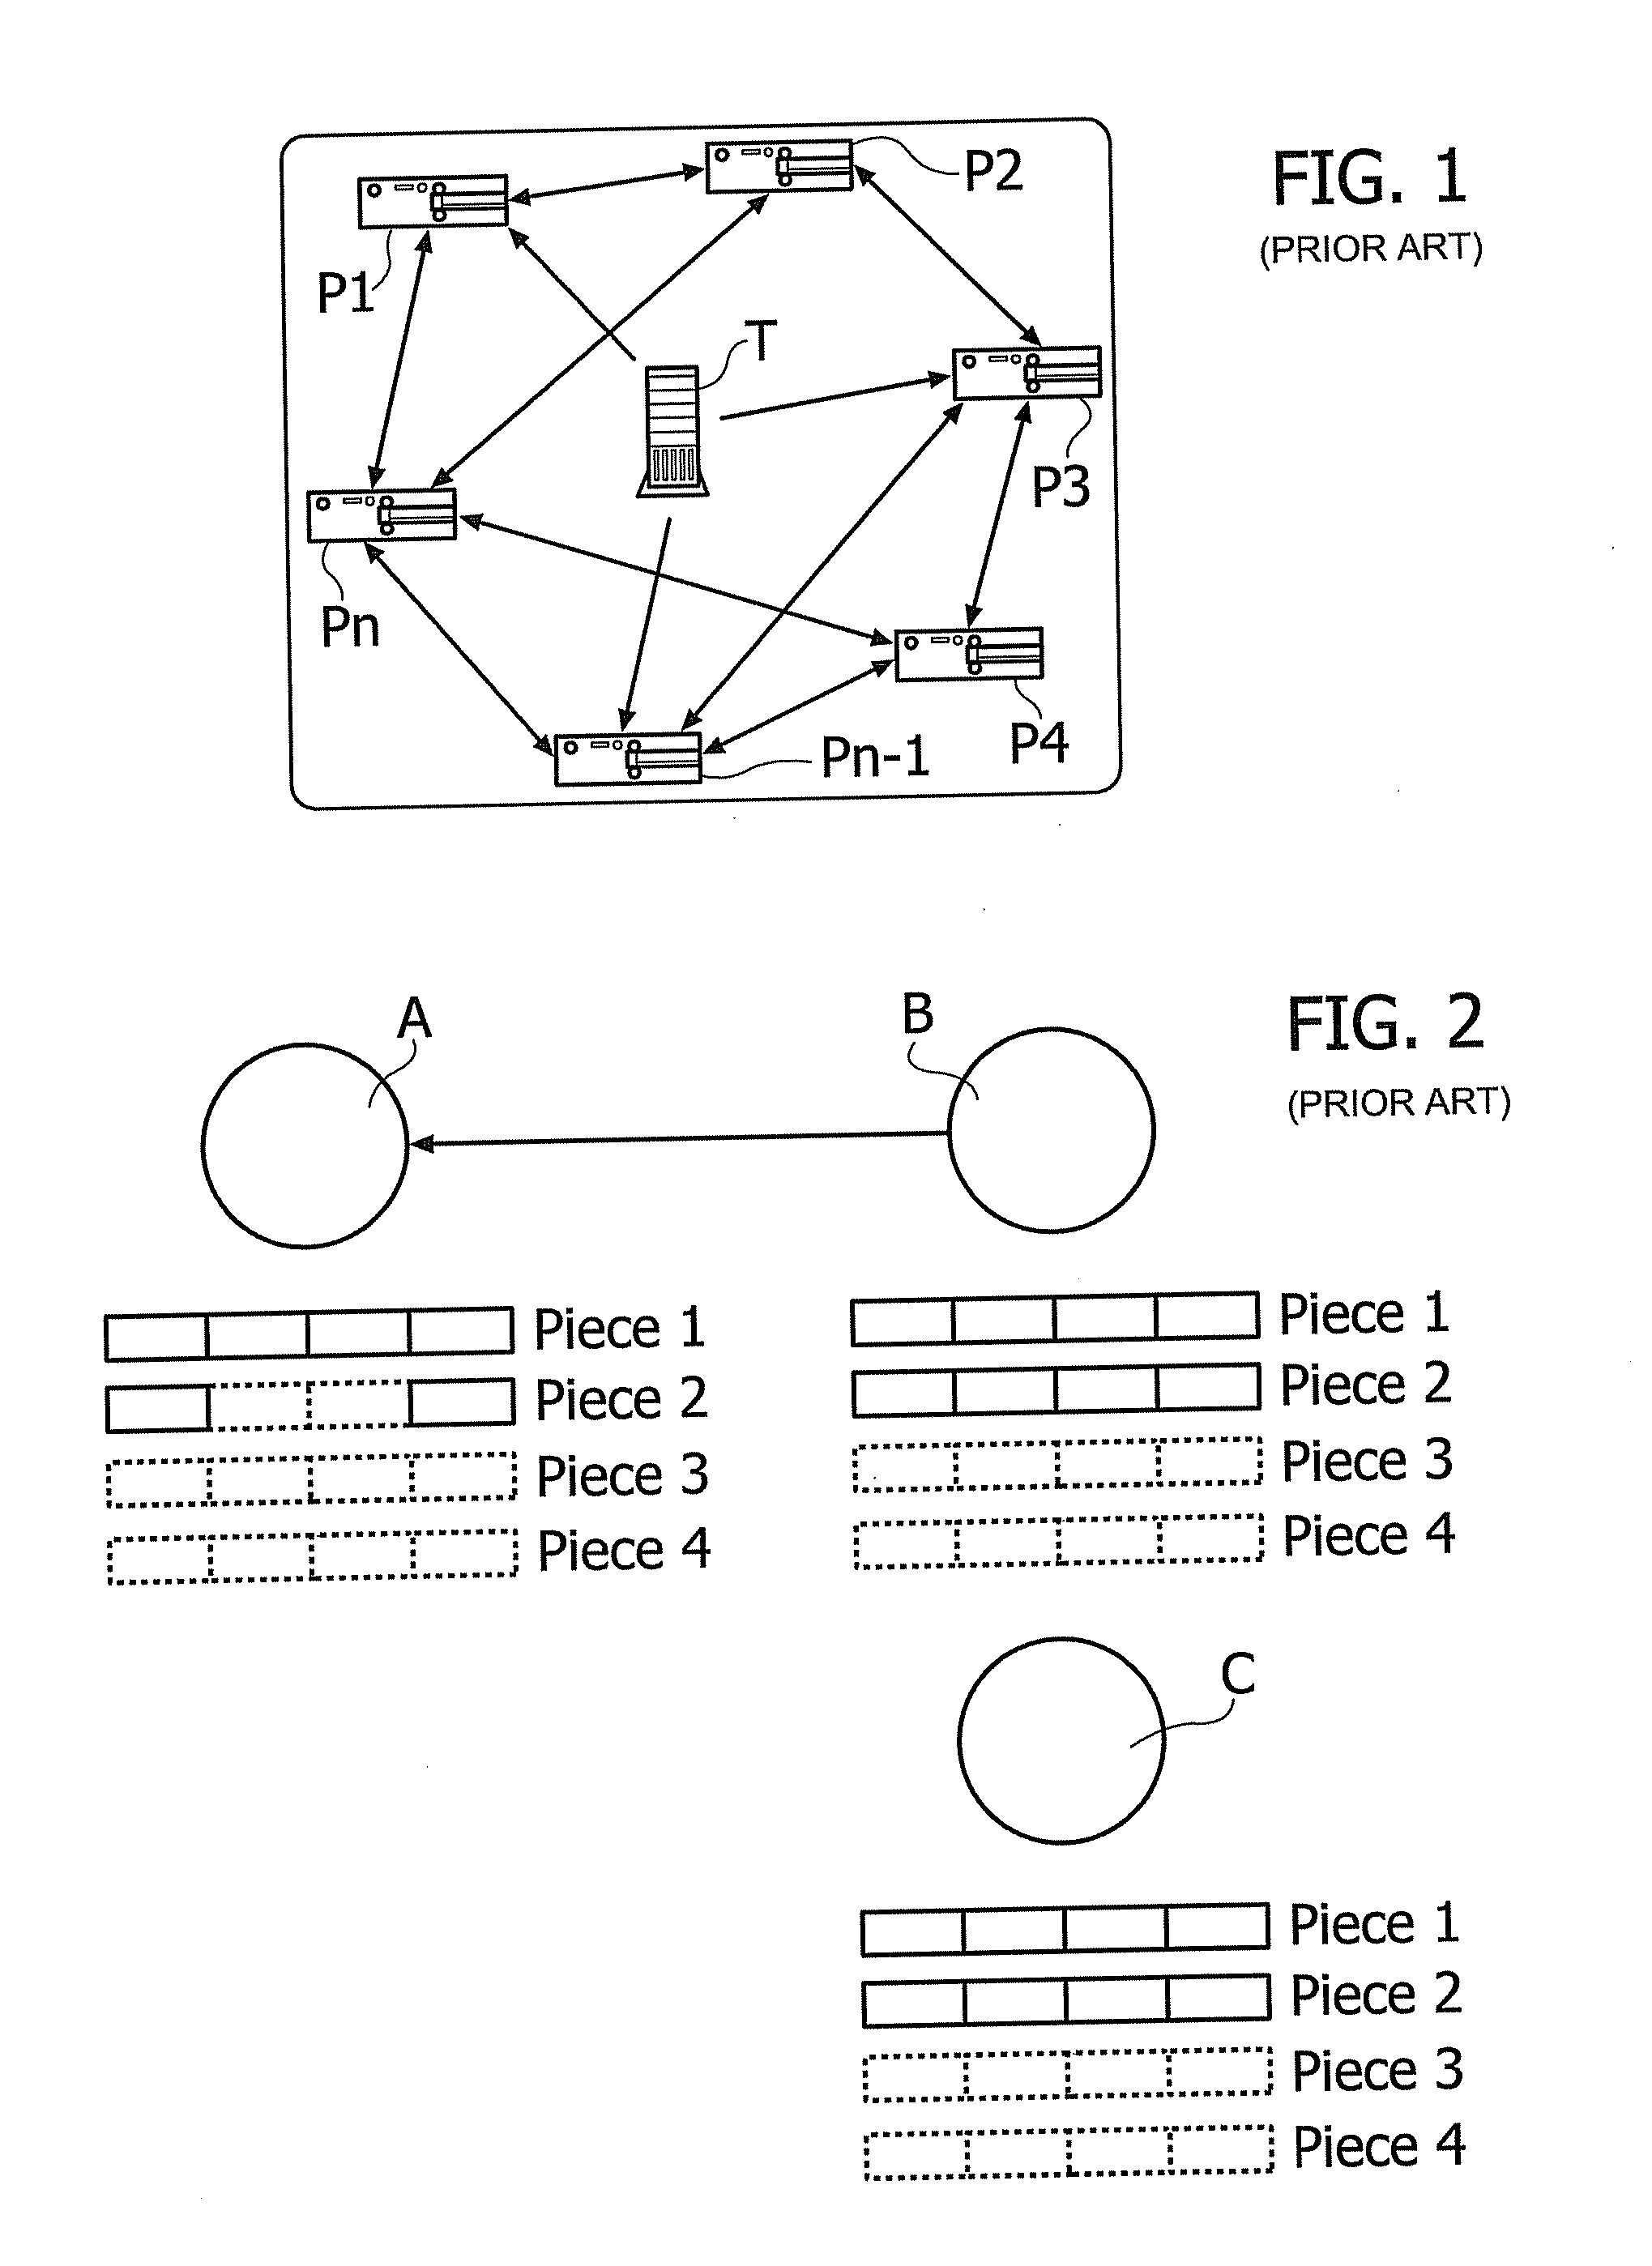 Method and systems of distributing media content and related computer program product